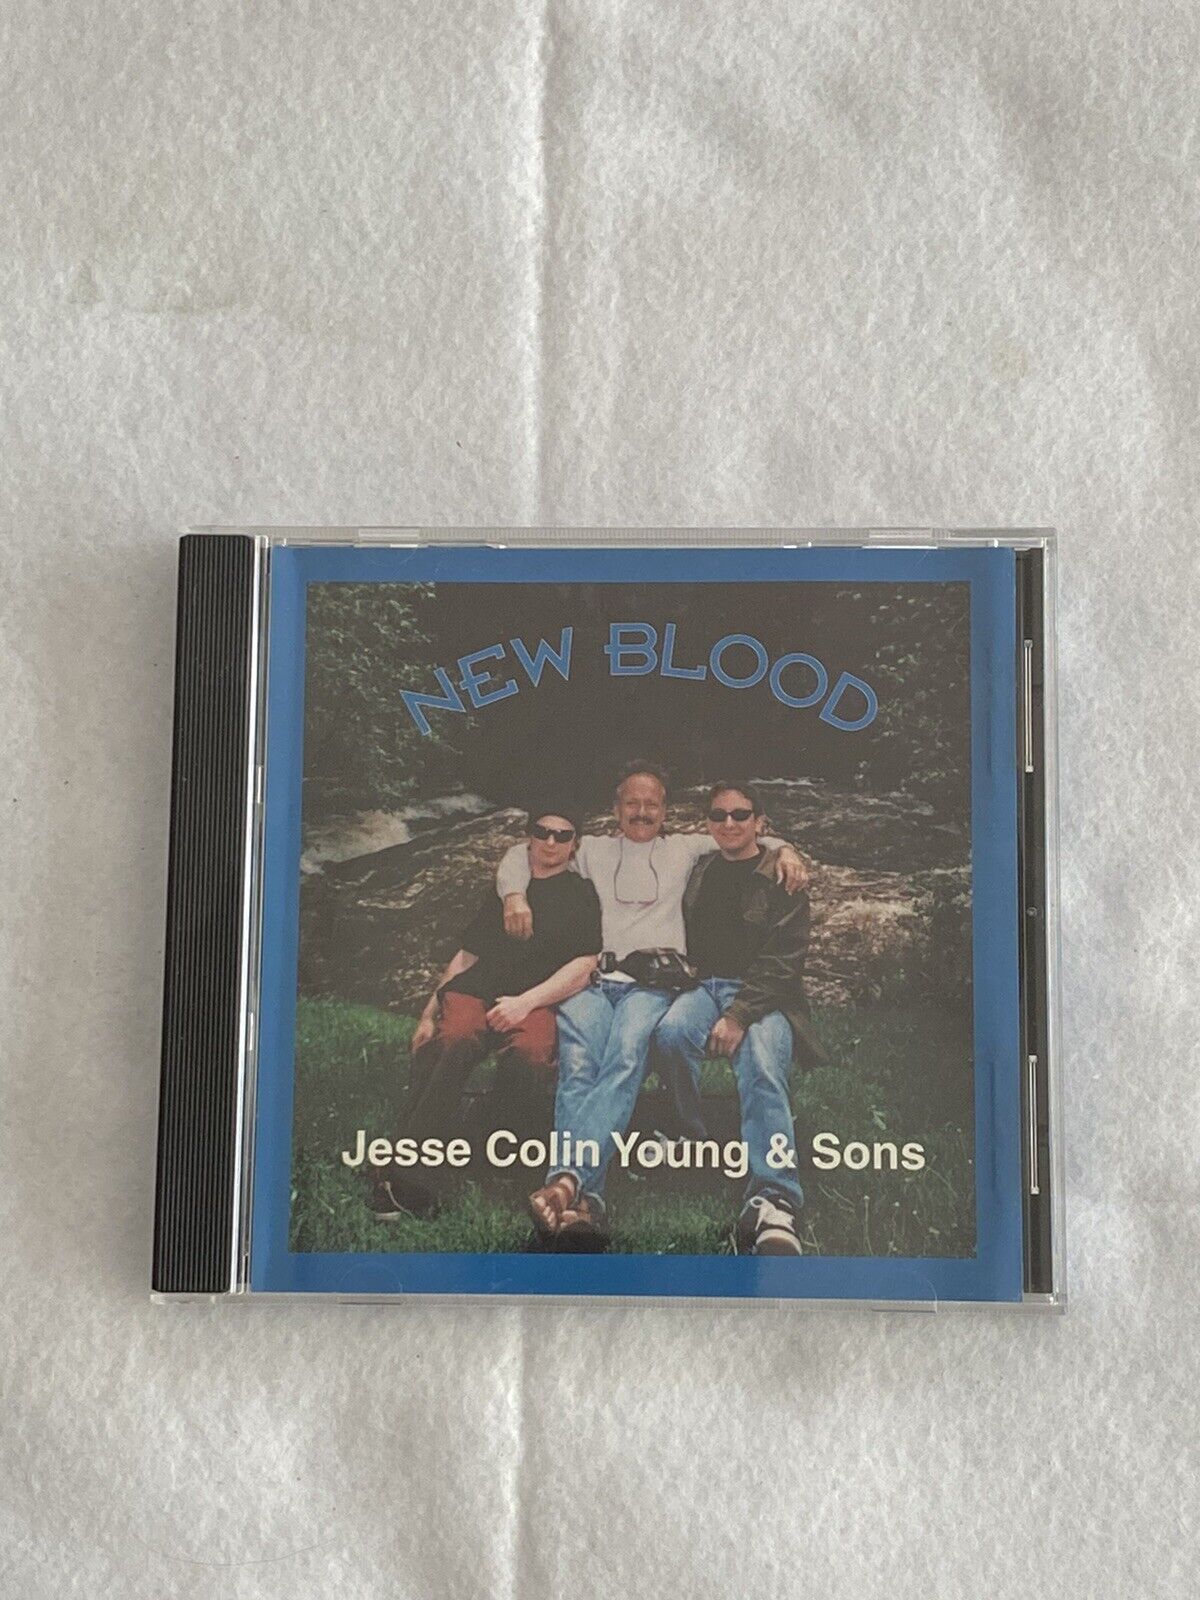 Jesse Colin Young & Sons, New Blood CD, Super Rare - SIGNED